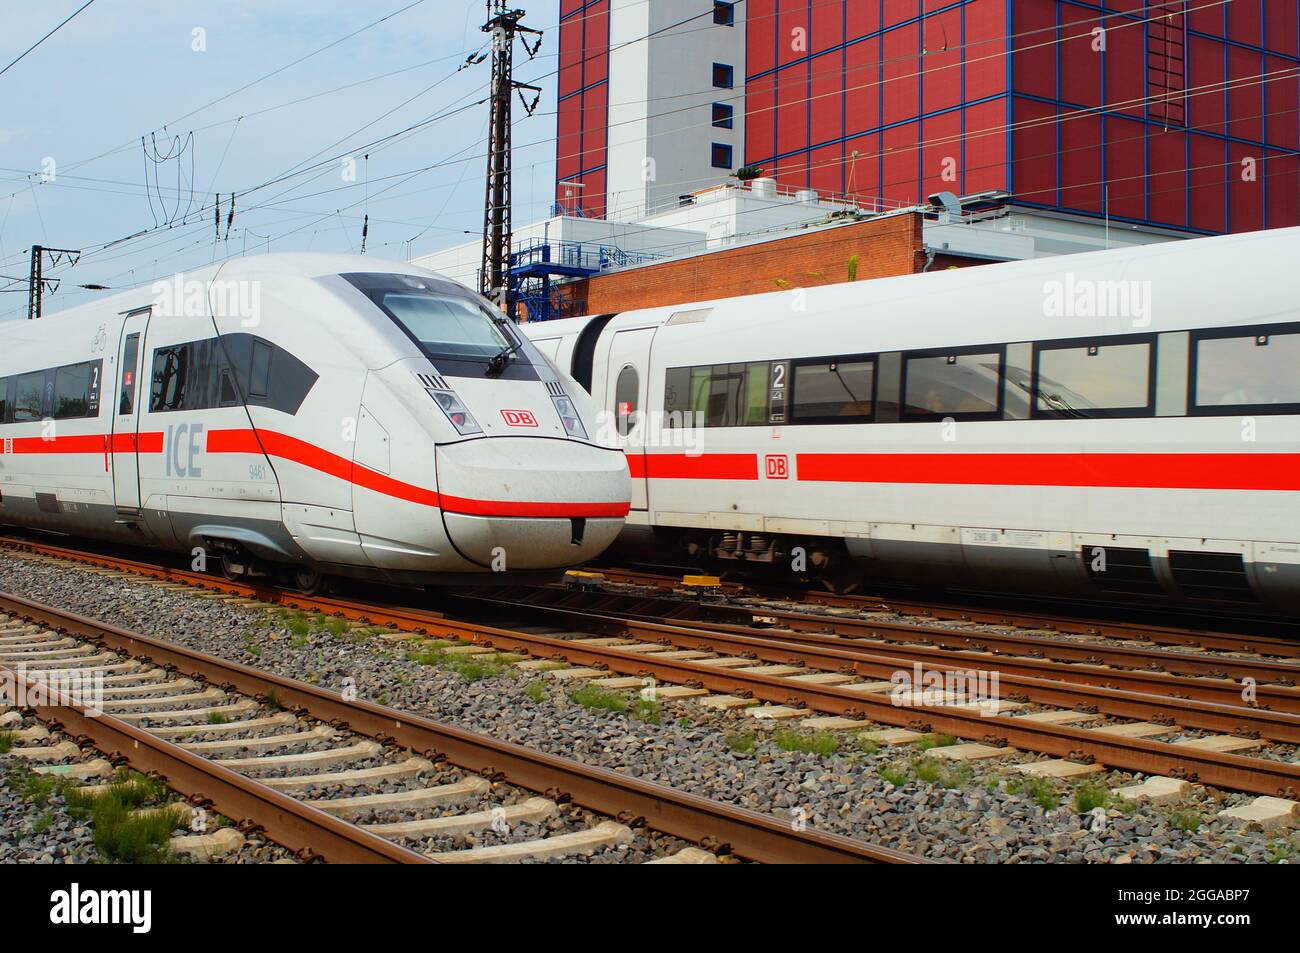 FRANKFURT, GERMANY - Aug 12, 2021: An ICE 4 is heading Frankfurt Central Station while an ICE 1 is leaving in the background. Meeting of the generatio Stock Photo